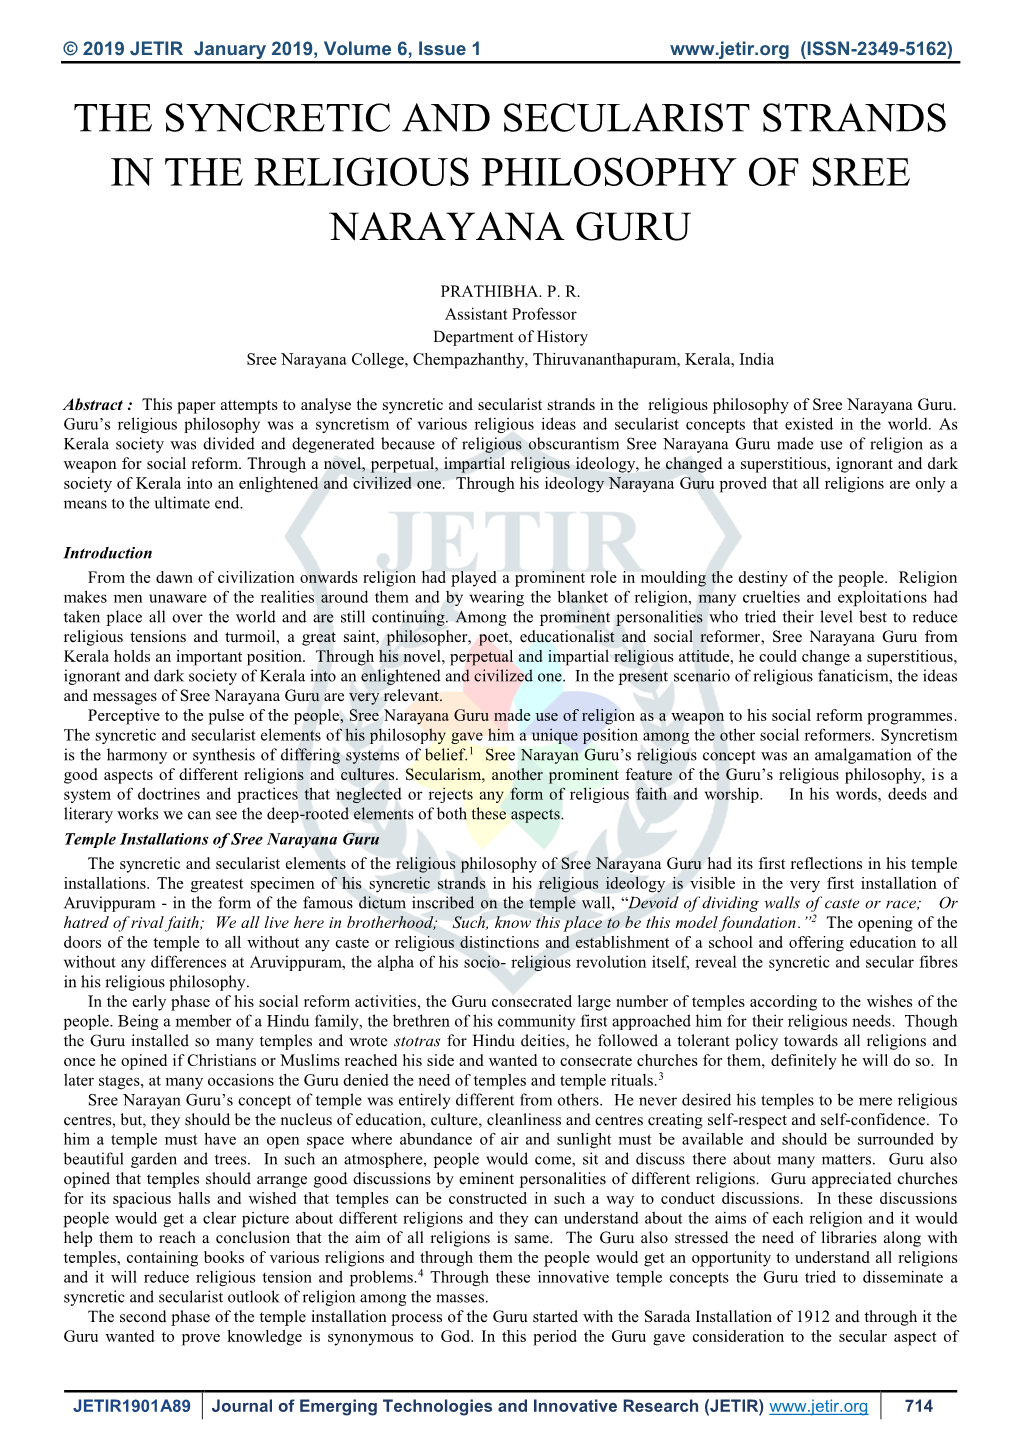 The Syncretic and Secularist Strands in the Religious Philosophy of Sree Narayana Guru